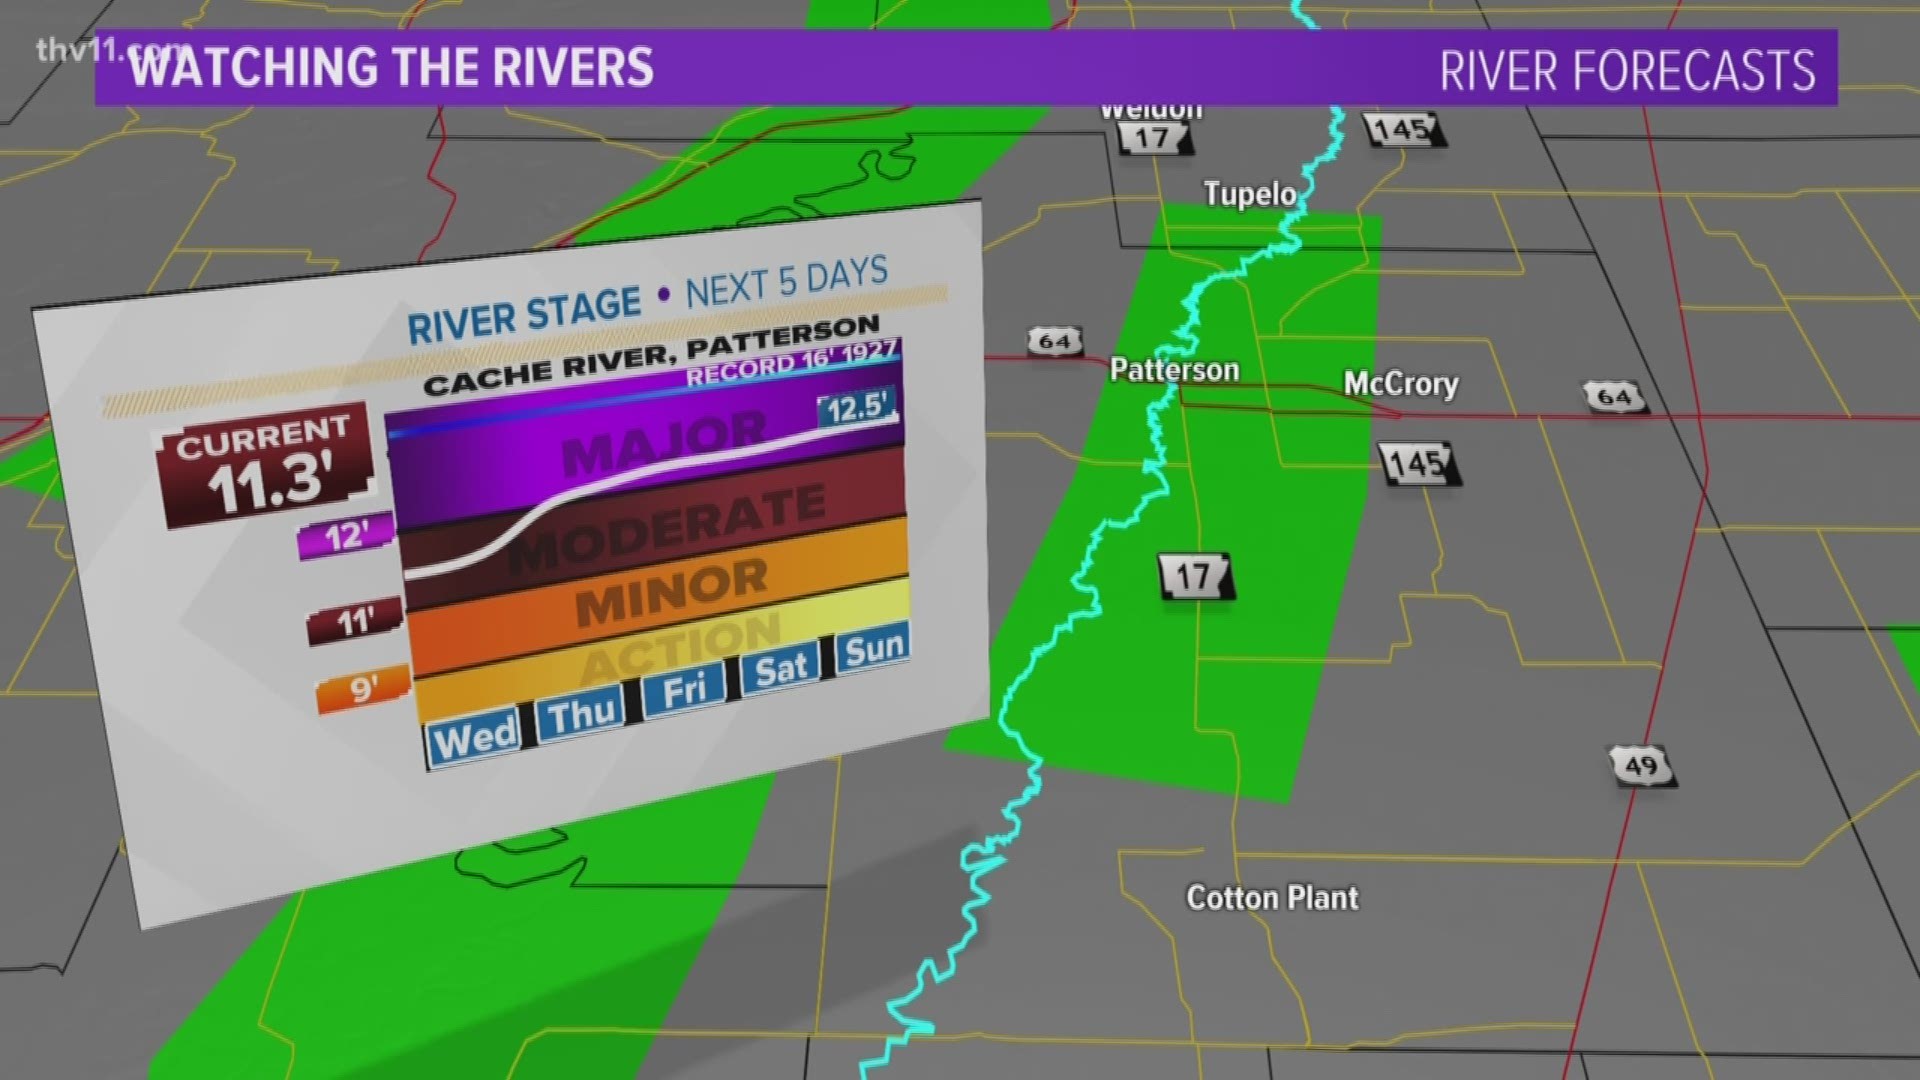 Eastern Arkansas was already feeling the threats of flooding near busy rivers, but now we're watching closely as heavy rain moves in.